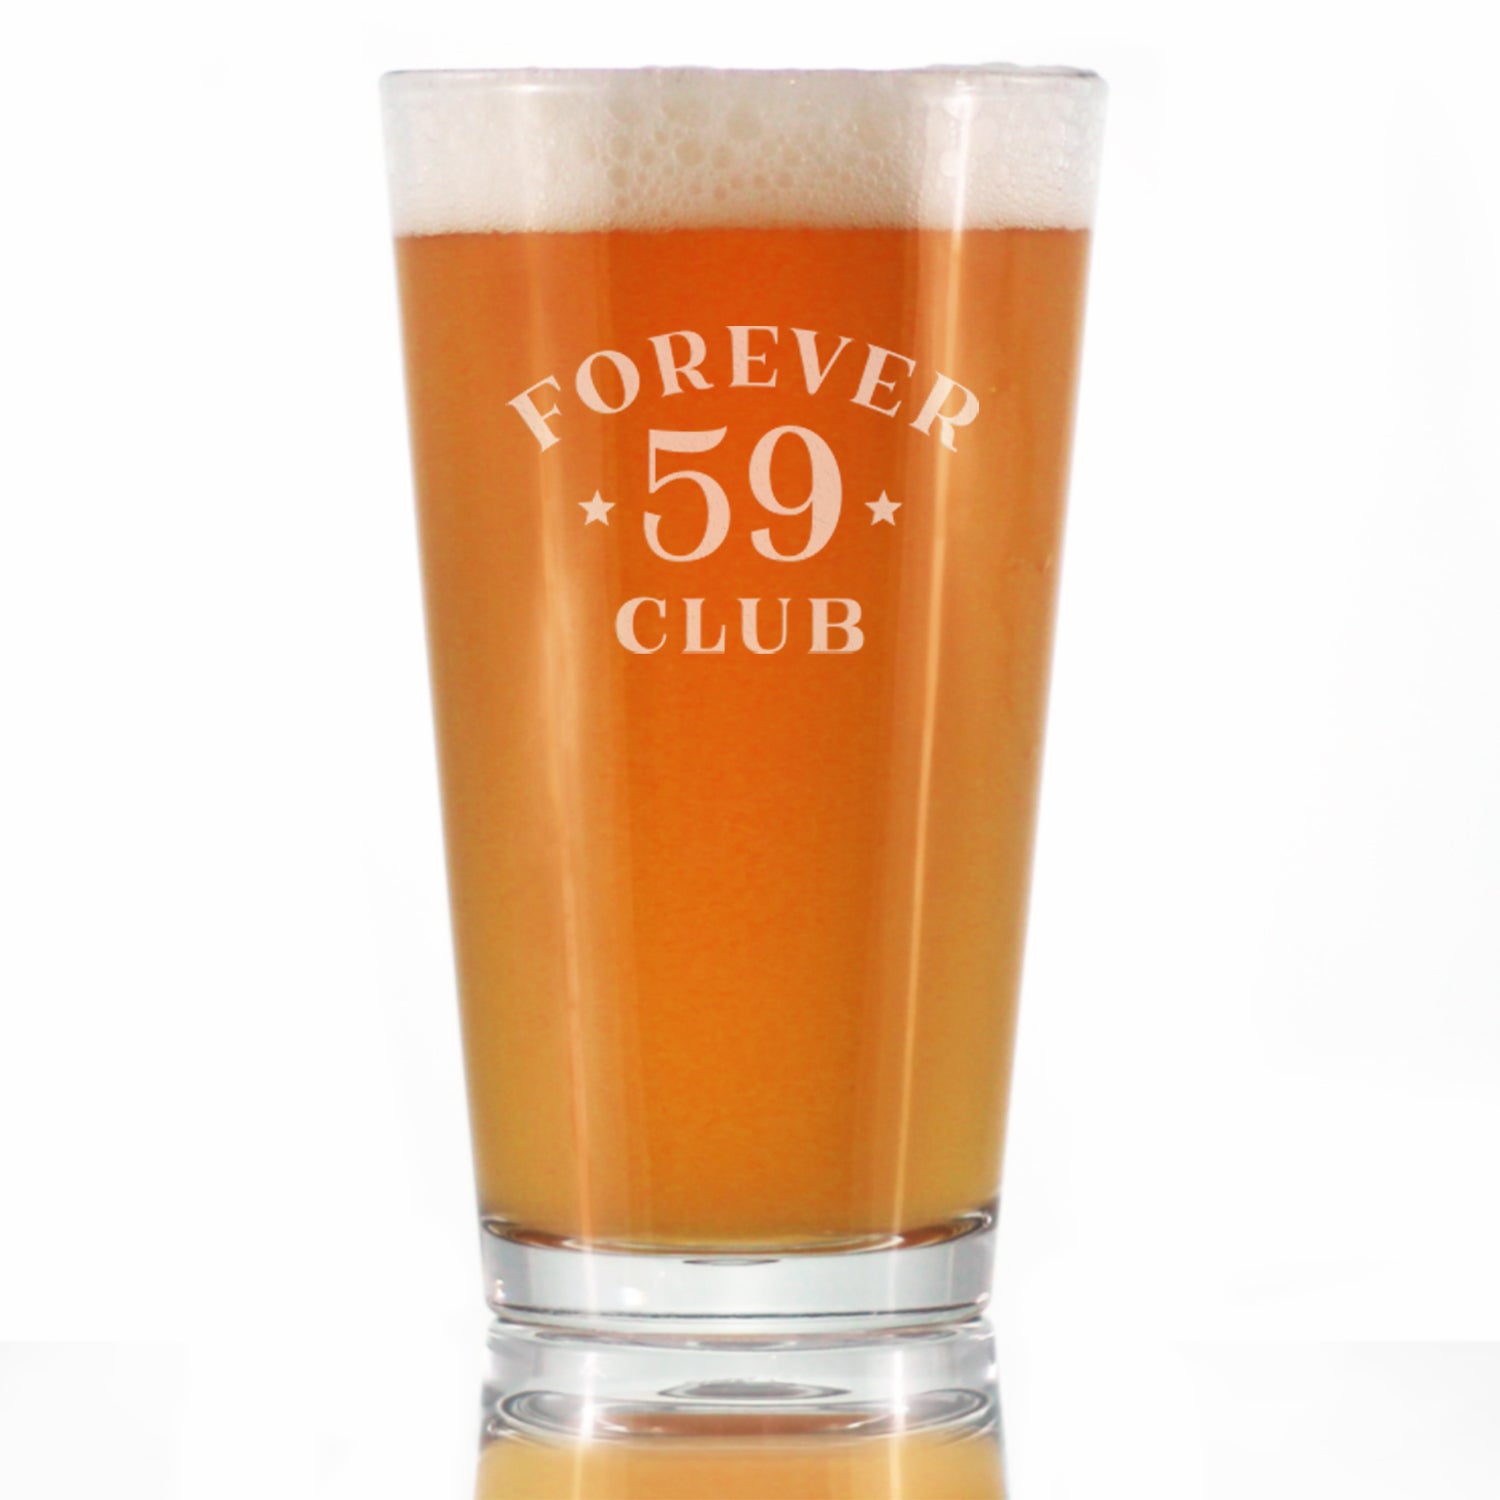 Forever 59 Club - Pint Glass for Beer 60th Birthday Gifts for Women & Men Turning 60 - Fun Bday Party Decor - 16 Oz